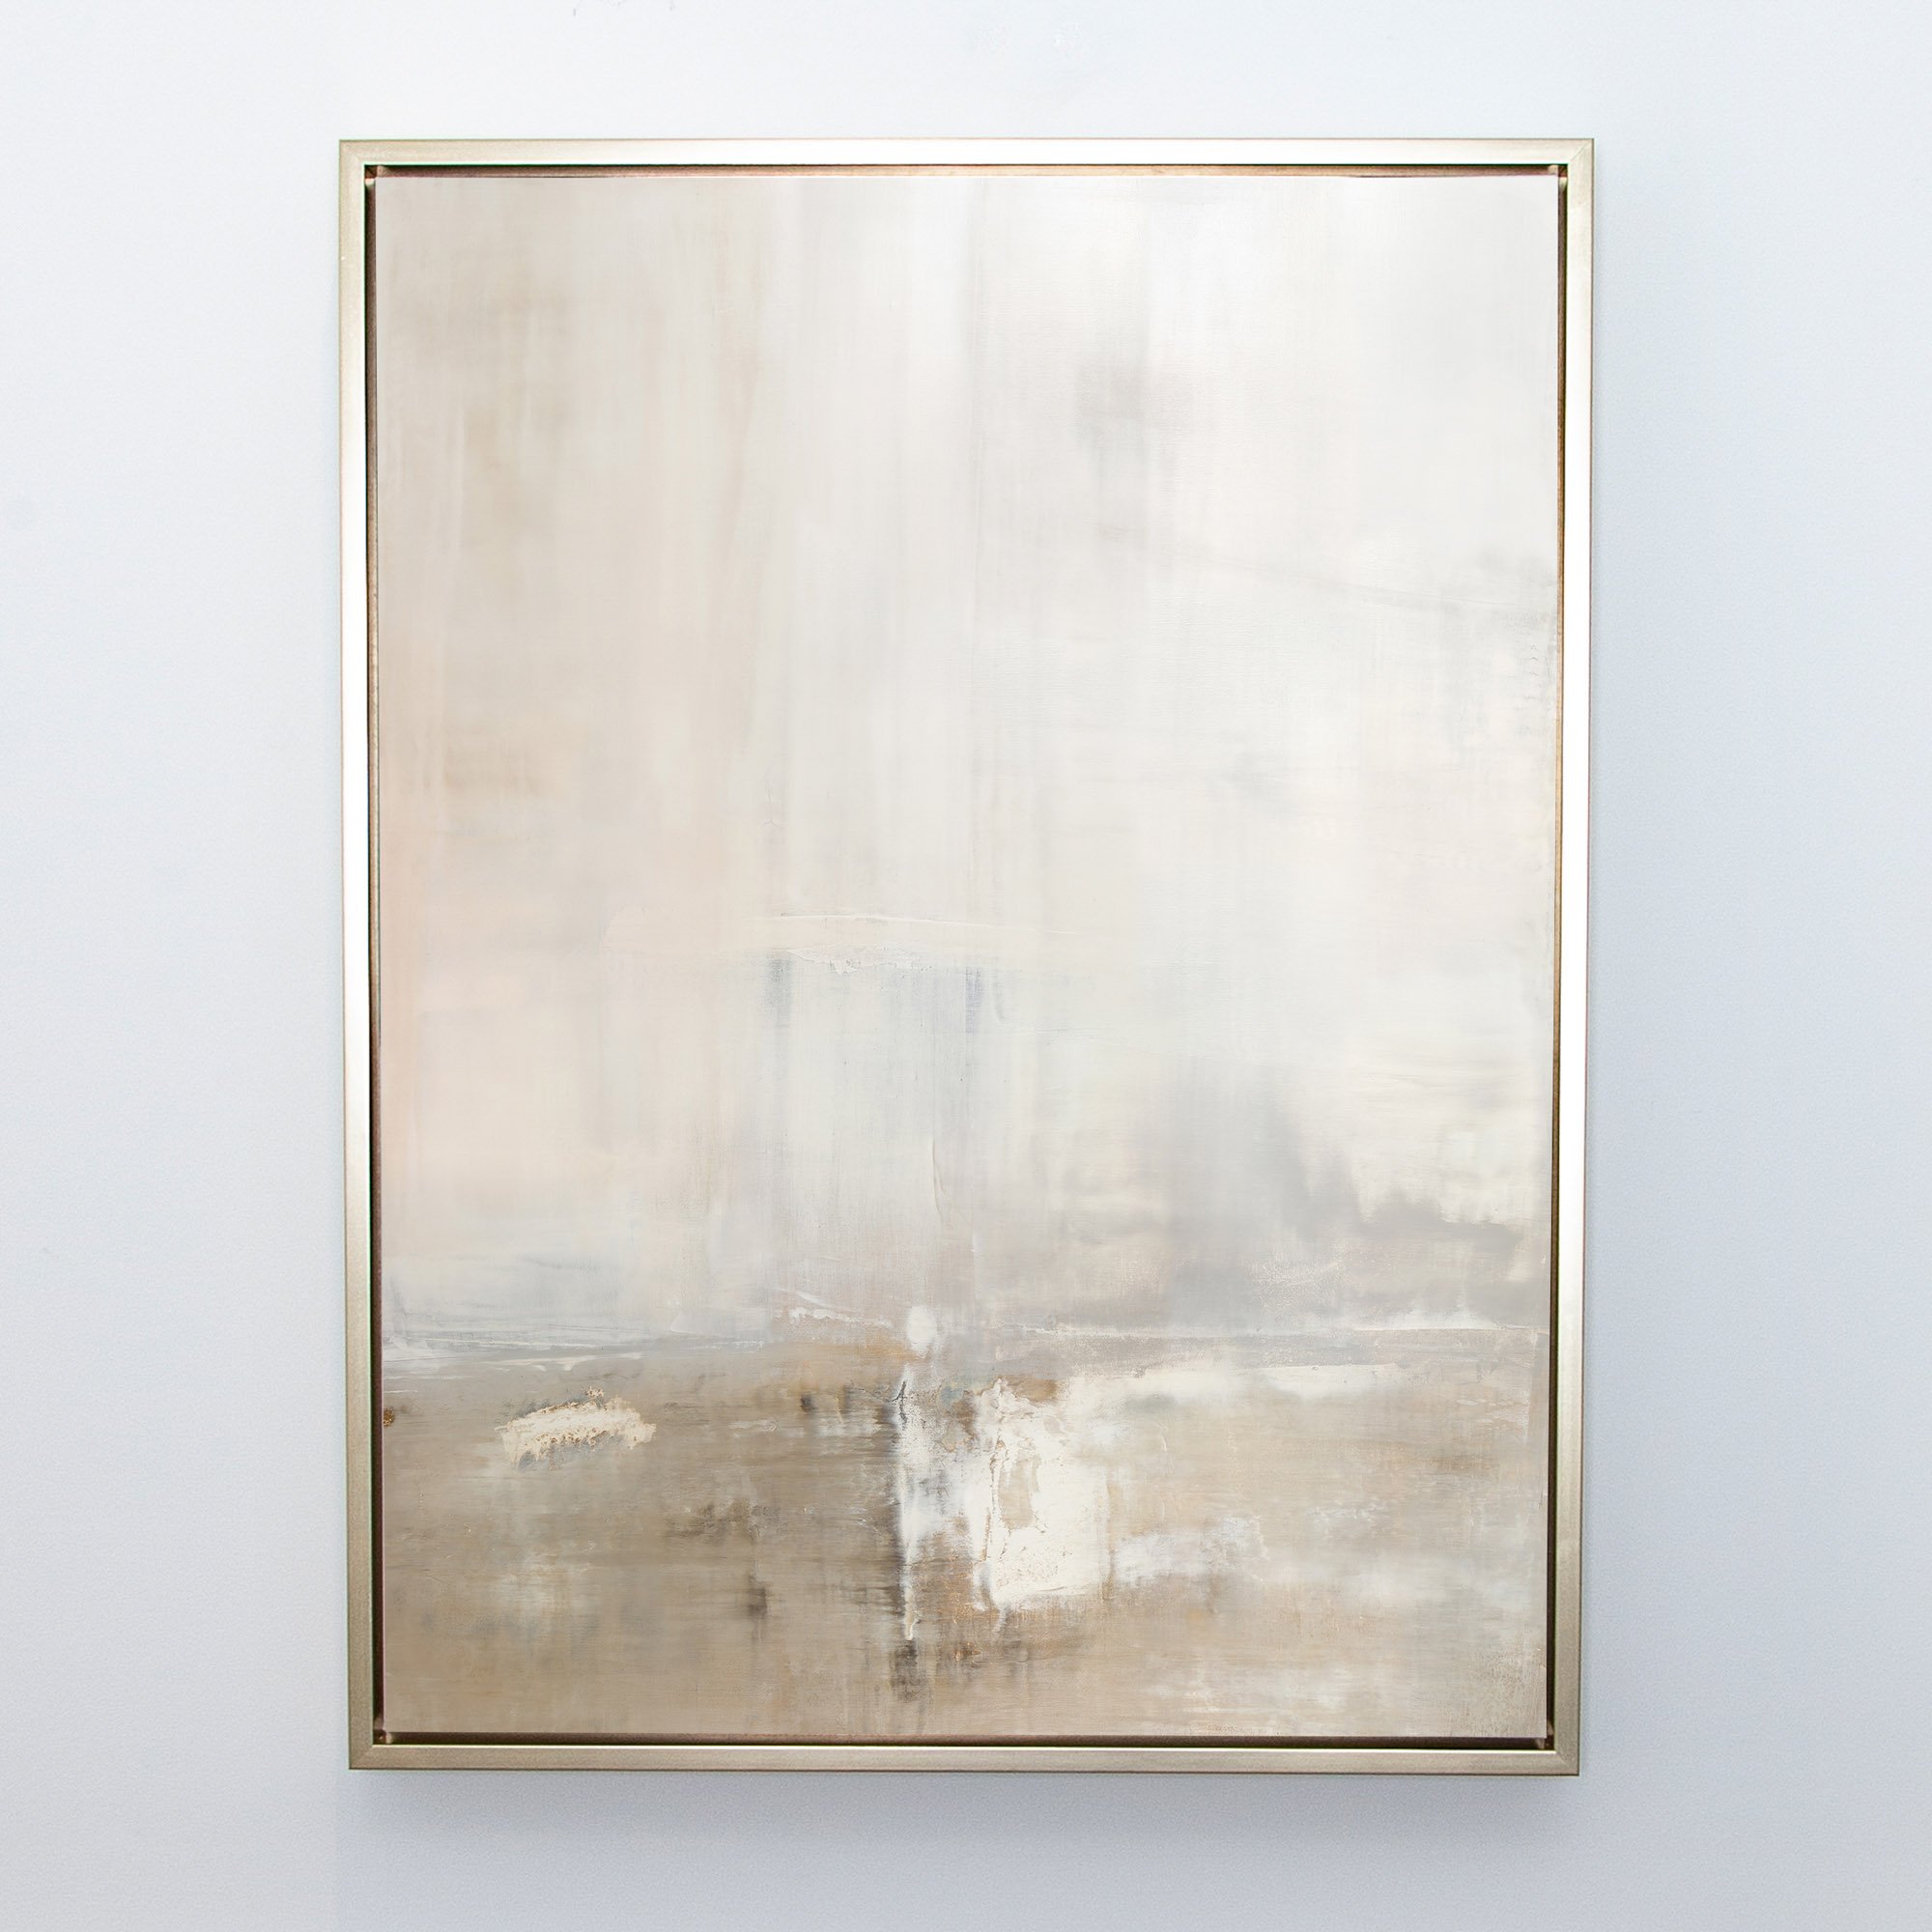 Dune - CCG-DU-3648_1 - 45 inches by 60 inches vertical in champagne gold frame - by Carol Benson-Cobb